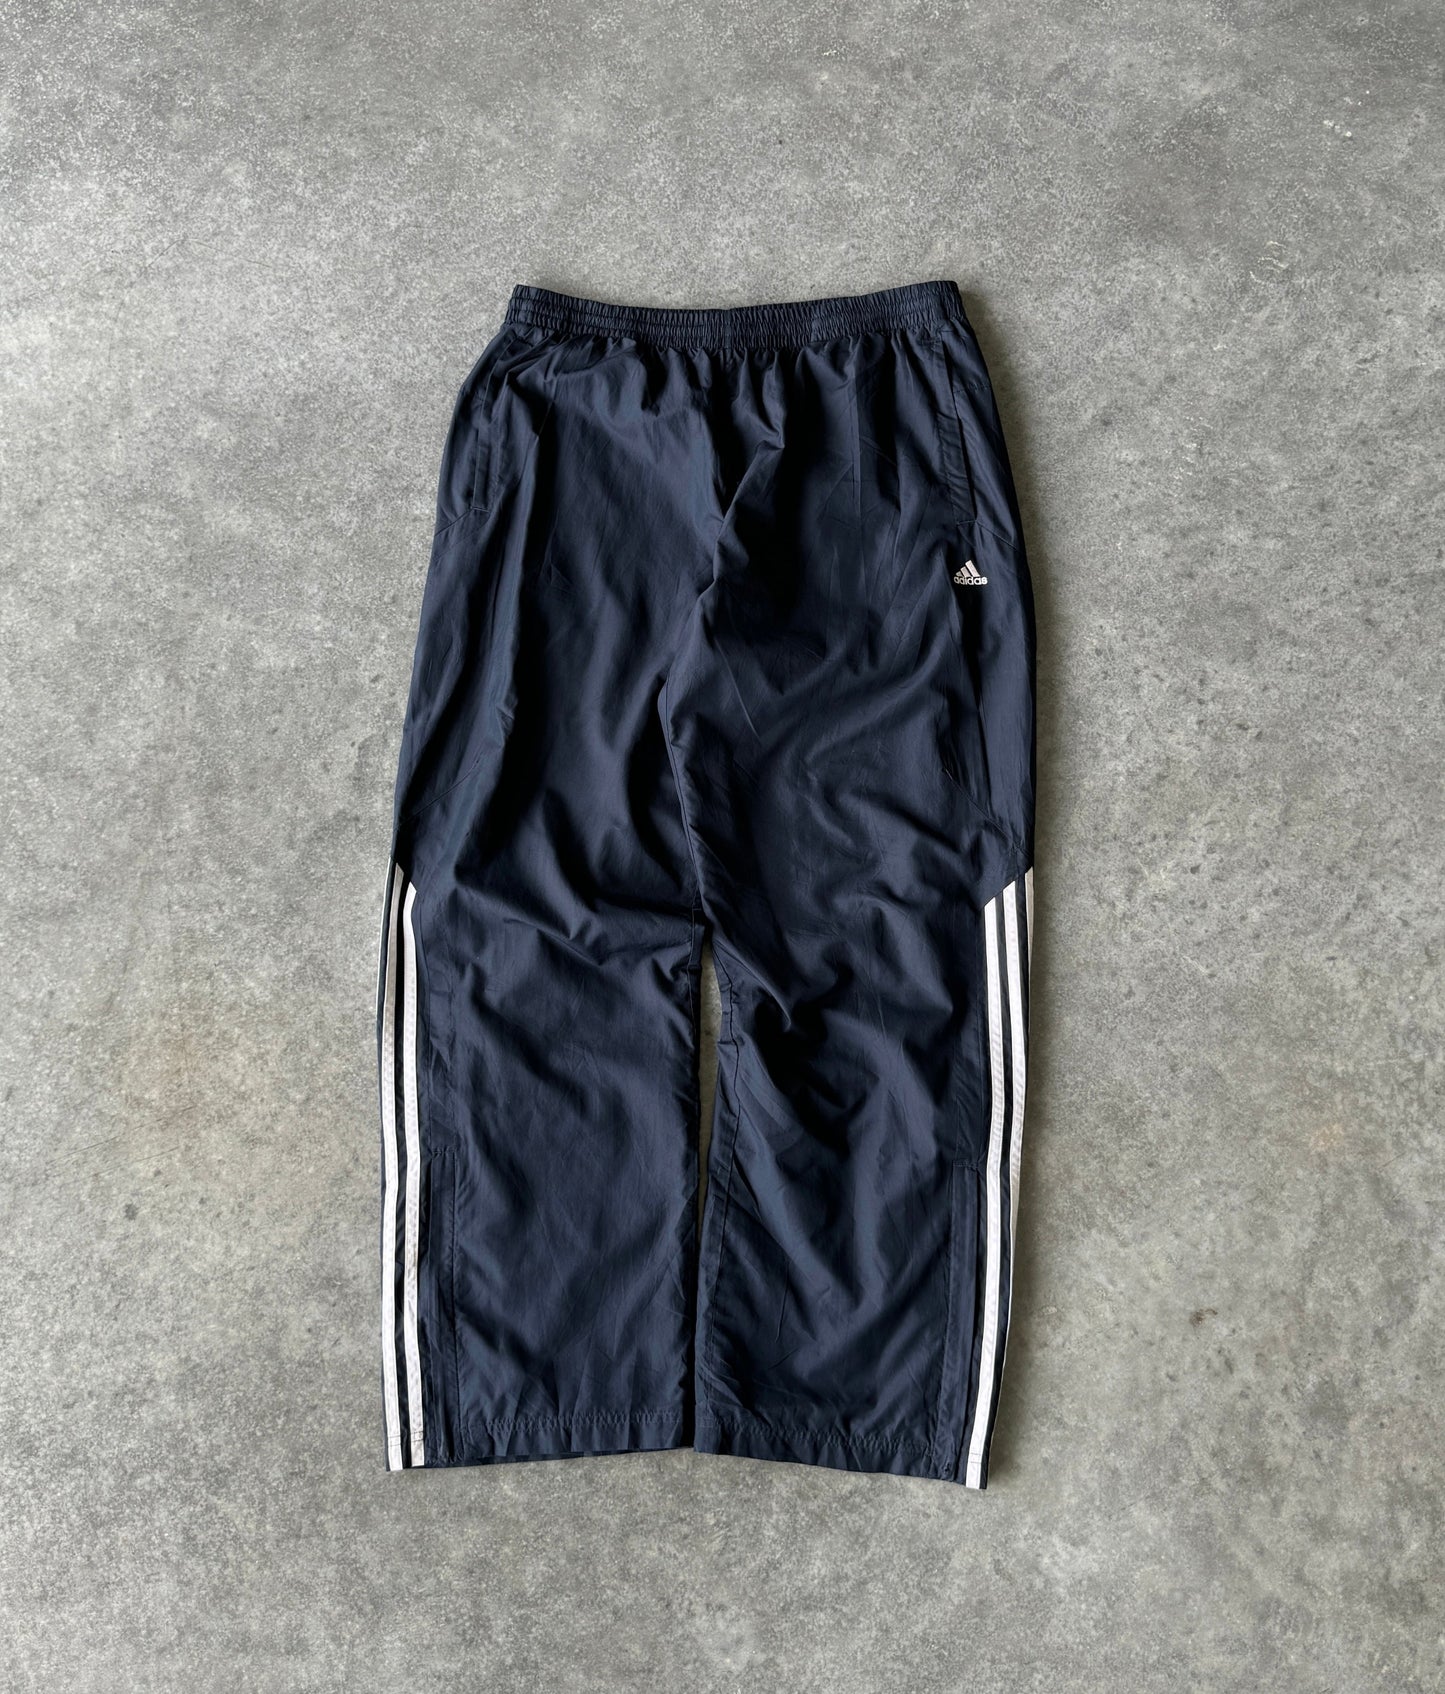 Vintage 00s Adidas Embroided Track Pants (L)